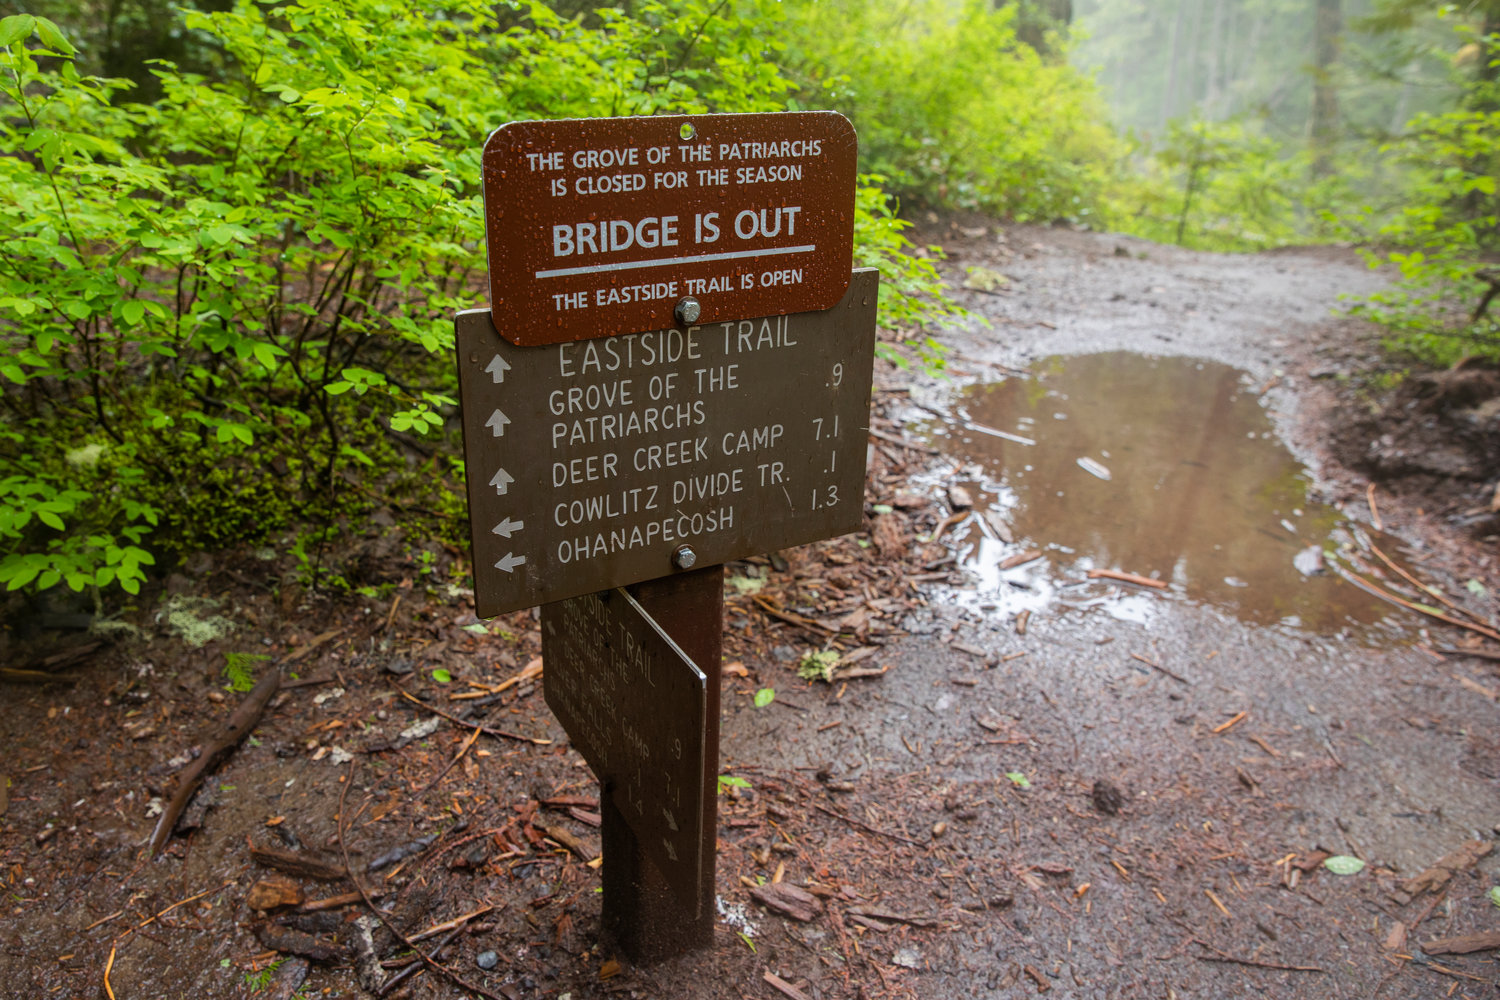 The Grove of the Patriarchs remains closed because the “bridge is out,” per signage near the Ohanapecosh River in Mount Rainier National Park.